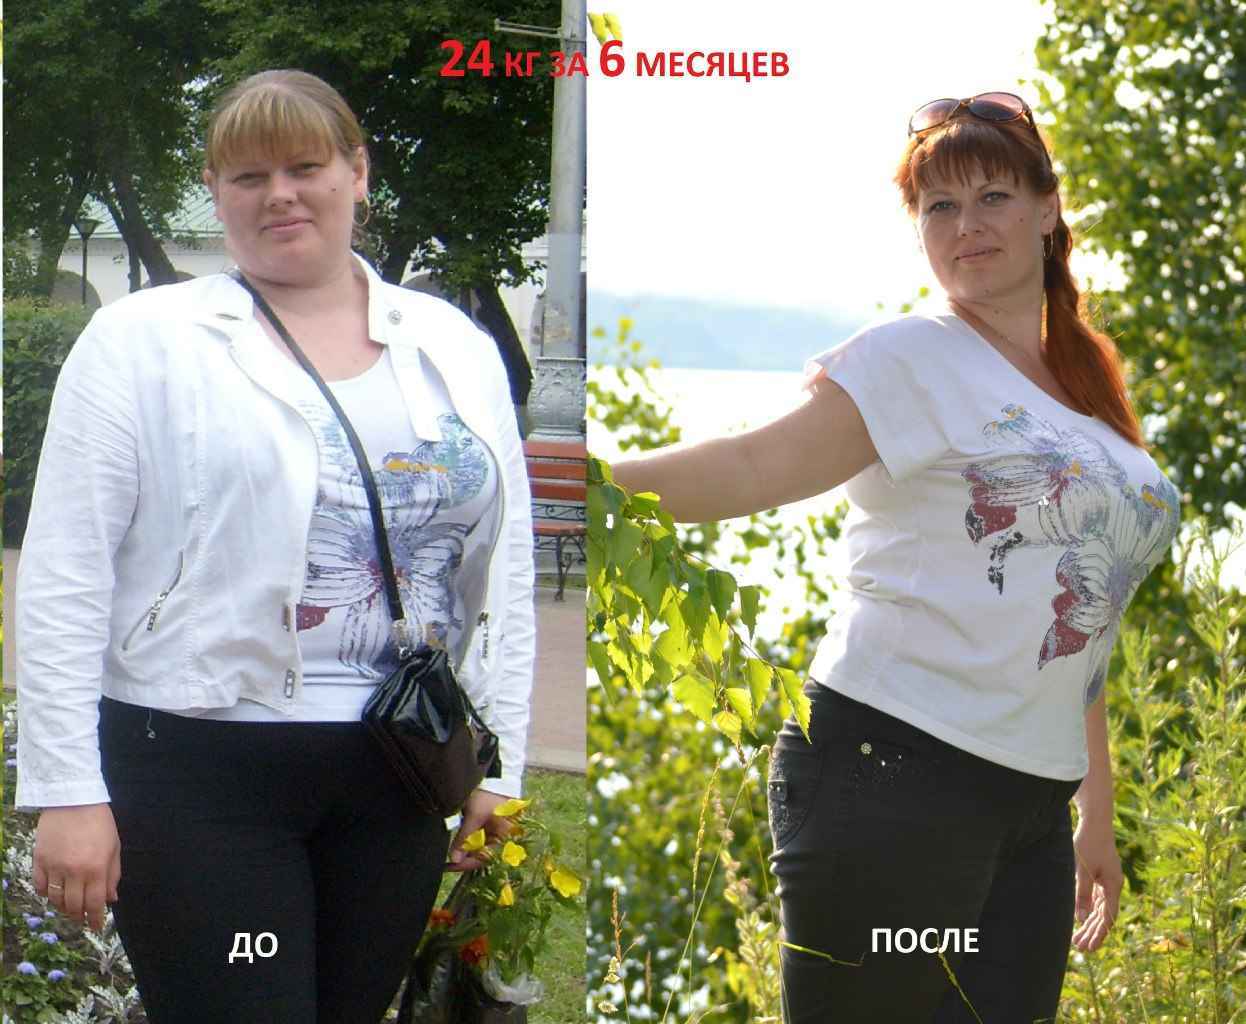 weight loss before and after pictures (11)